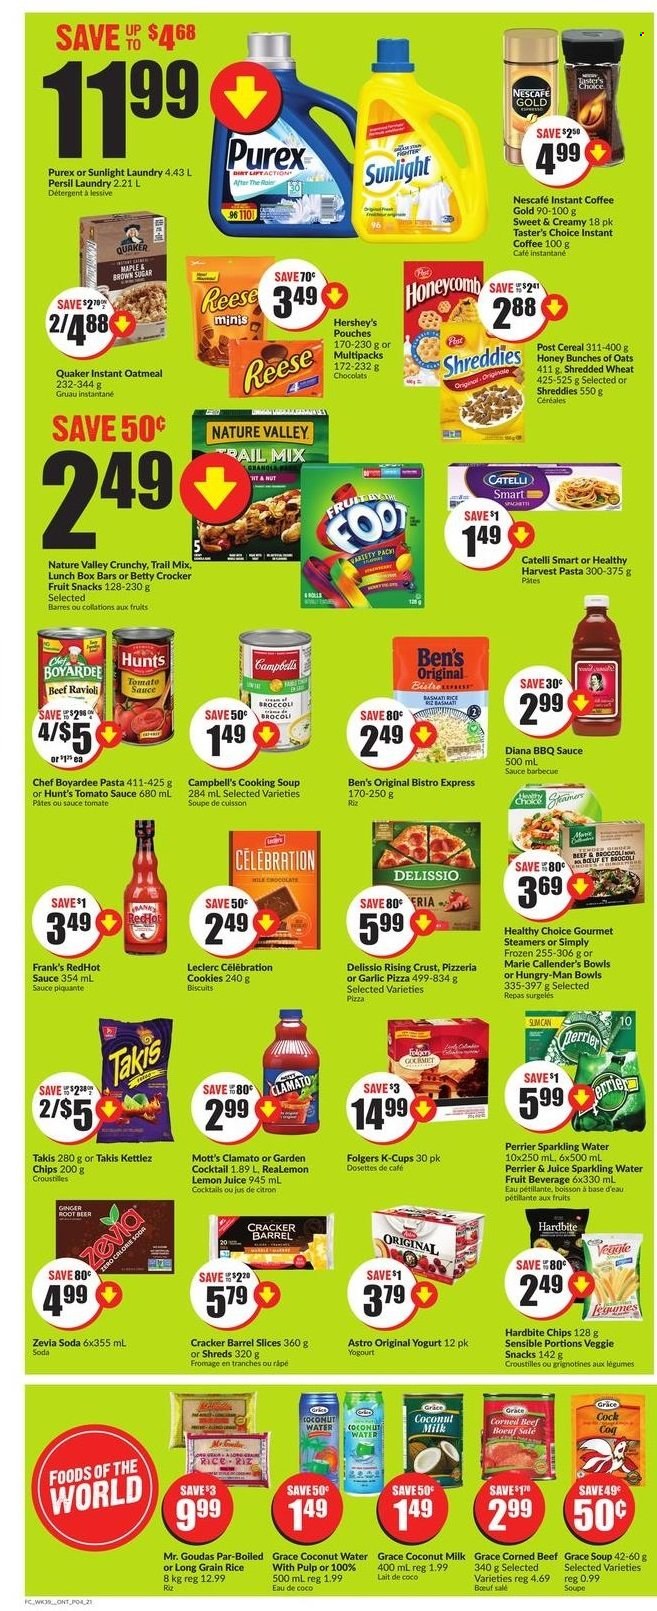 thumbnail - Chalo! FreshCo. Flyer - January 20, 2022 - January 26, 2022 - Sales products - garlic, ginger, Mott's, Campbell's, ravioli, pizza, soup, pasta, sauce, Quaker, Healthy Choice, Marie Callender's, Harvest Pasta, corned beef, yoghurt, Hershey's, cookies, Celebration, crackers, biscuit, fruit snack, oatmeal, coconut milk, tomato sauce, Chef Boyardee, cereals, Nature Valley, rice, long grain rice, BBQ sauce, trail mix, Clamato, coconut water, Perrier, soda, sparkling water, lemon juice, instant coffee, Folgers, coffee capsules, K-Cups, beer, beef meat, Nescafé. Page 4.